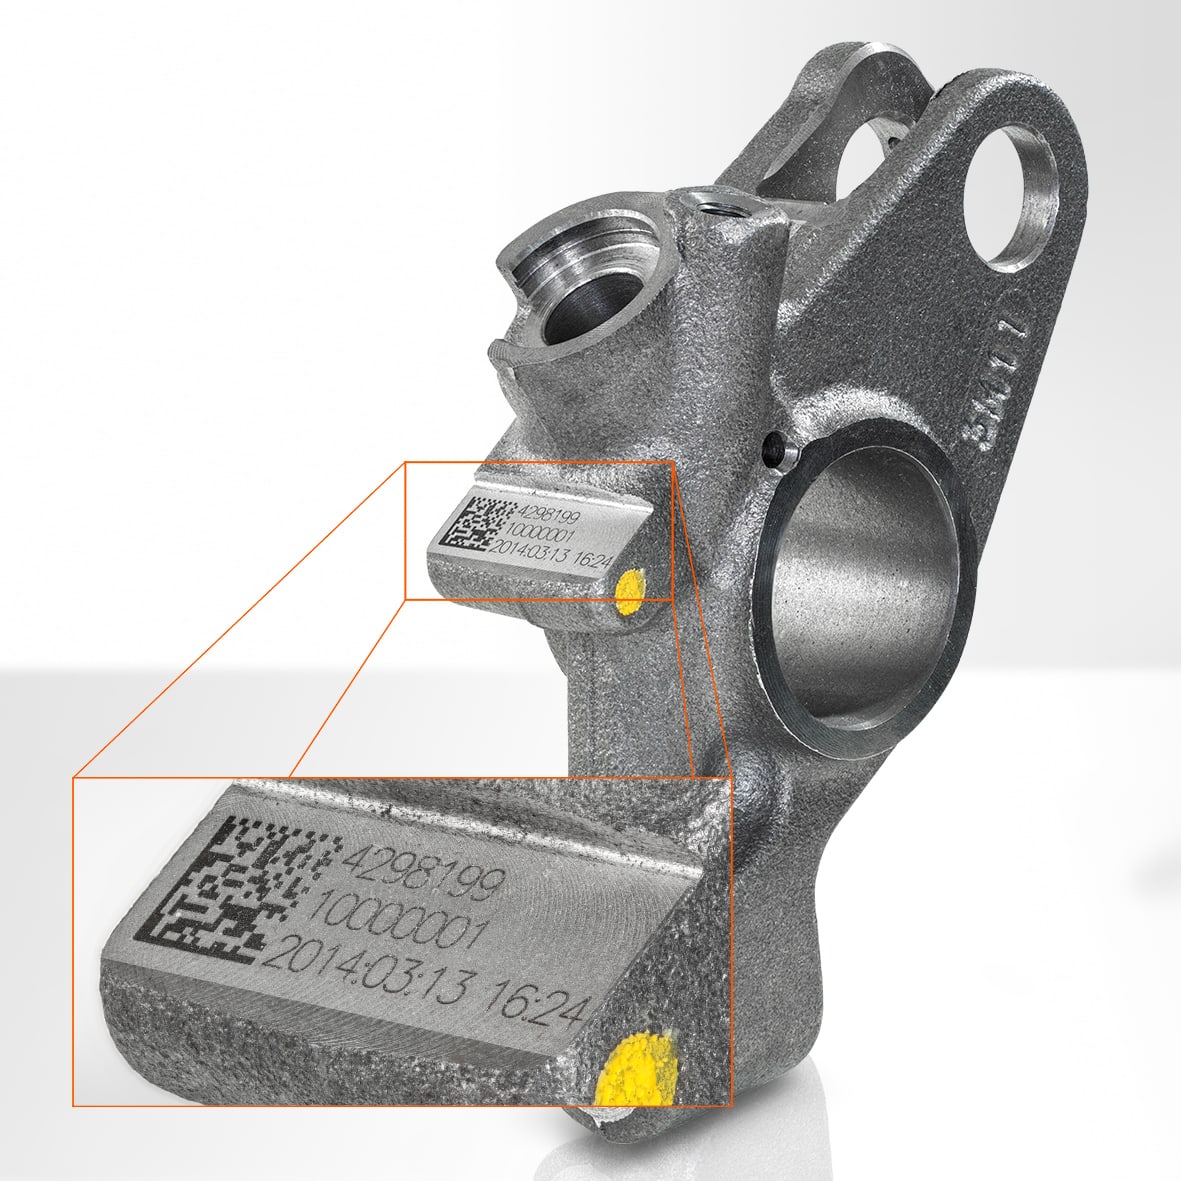 The rocker arm for a Jacobs Vehicle Systems engine brake is marked with a traceability code.